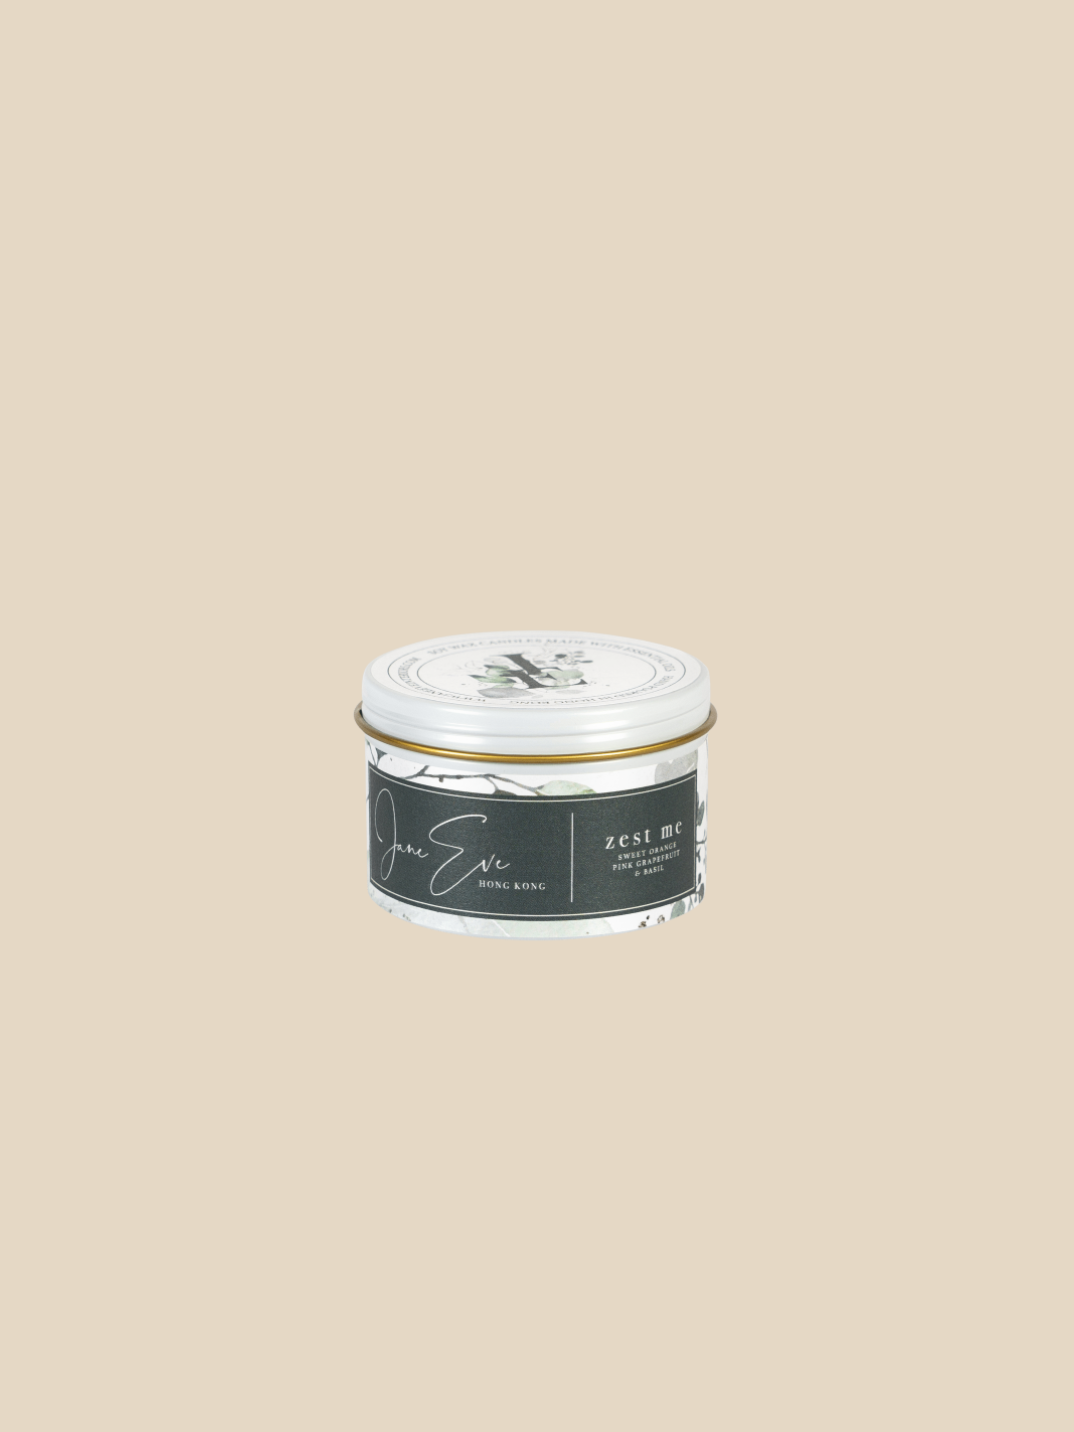 travel size soy wax candle handpoured in Hong Kong 